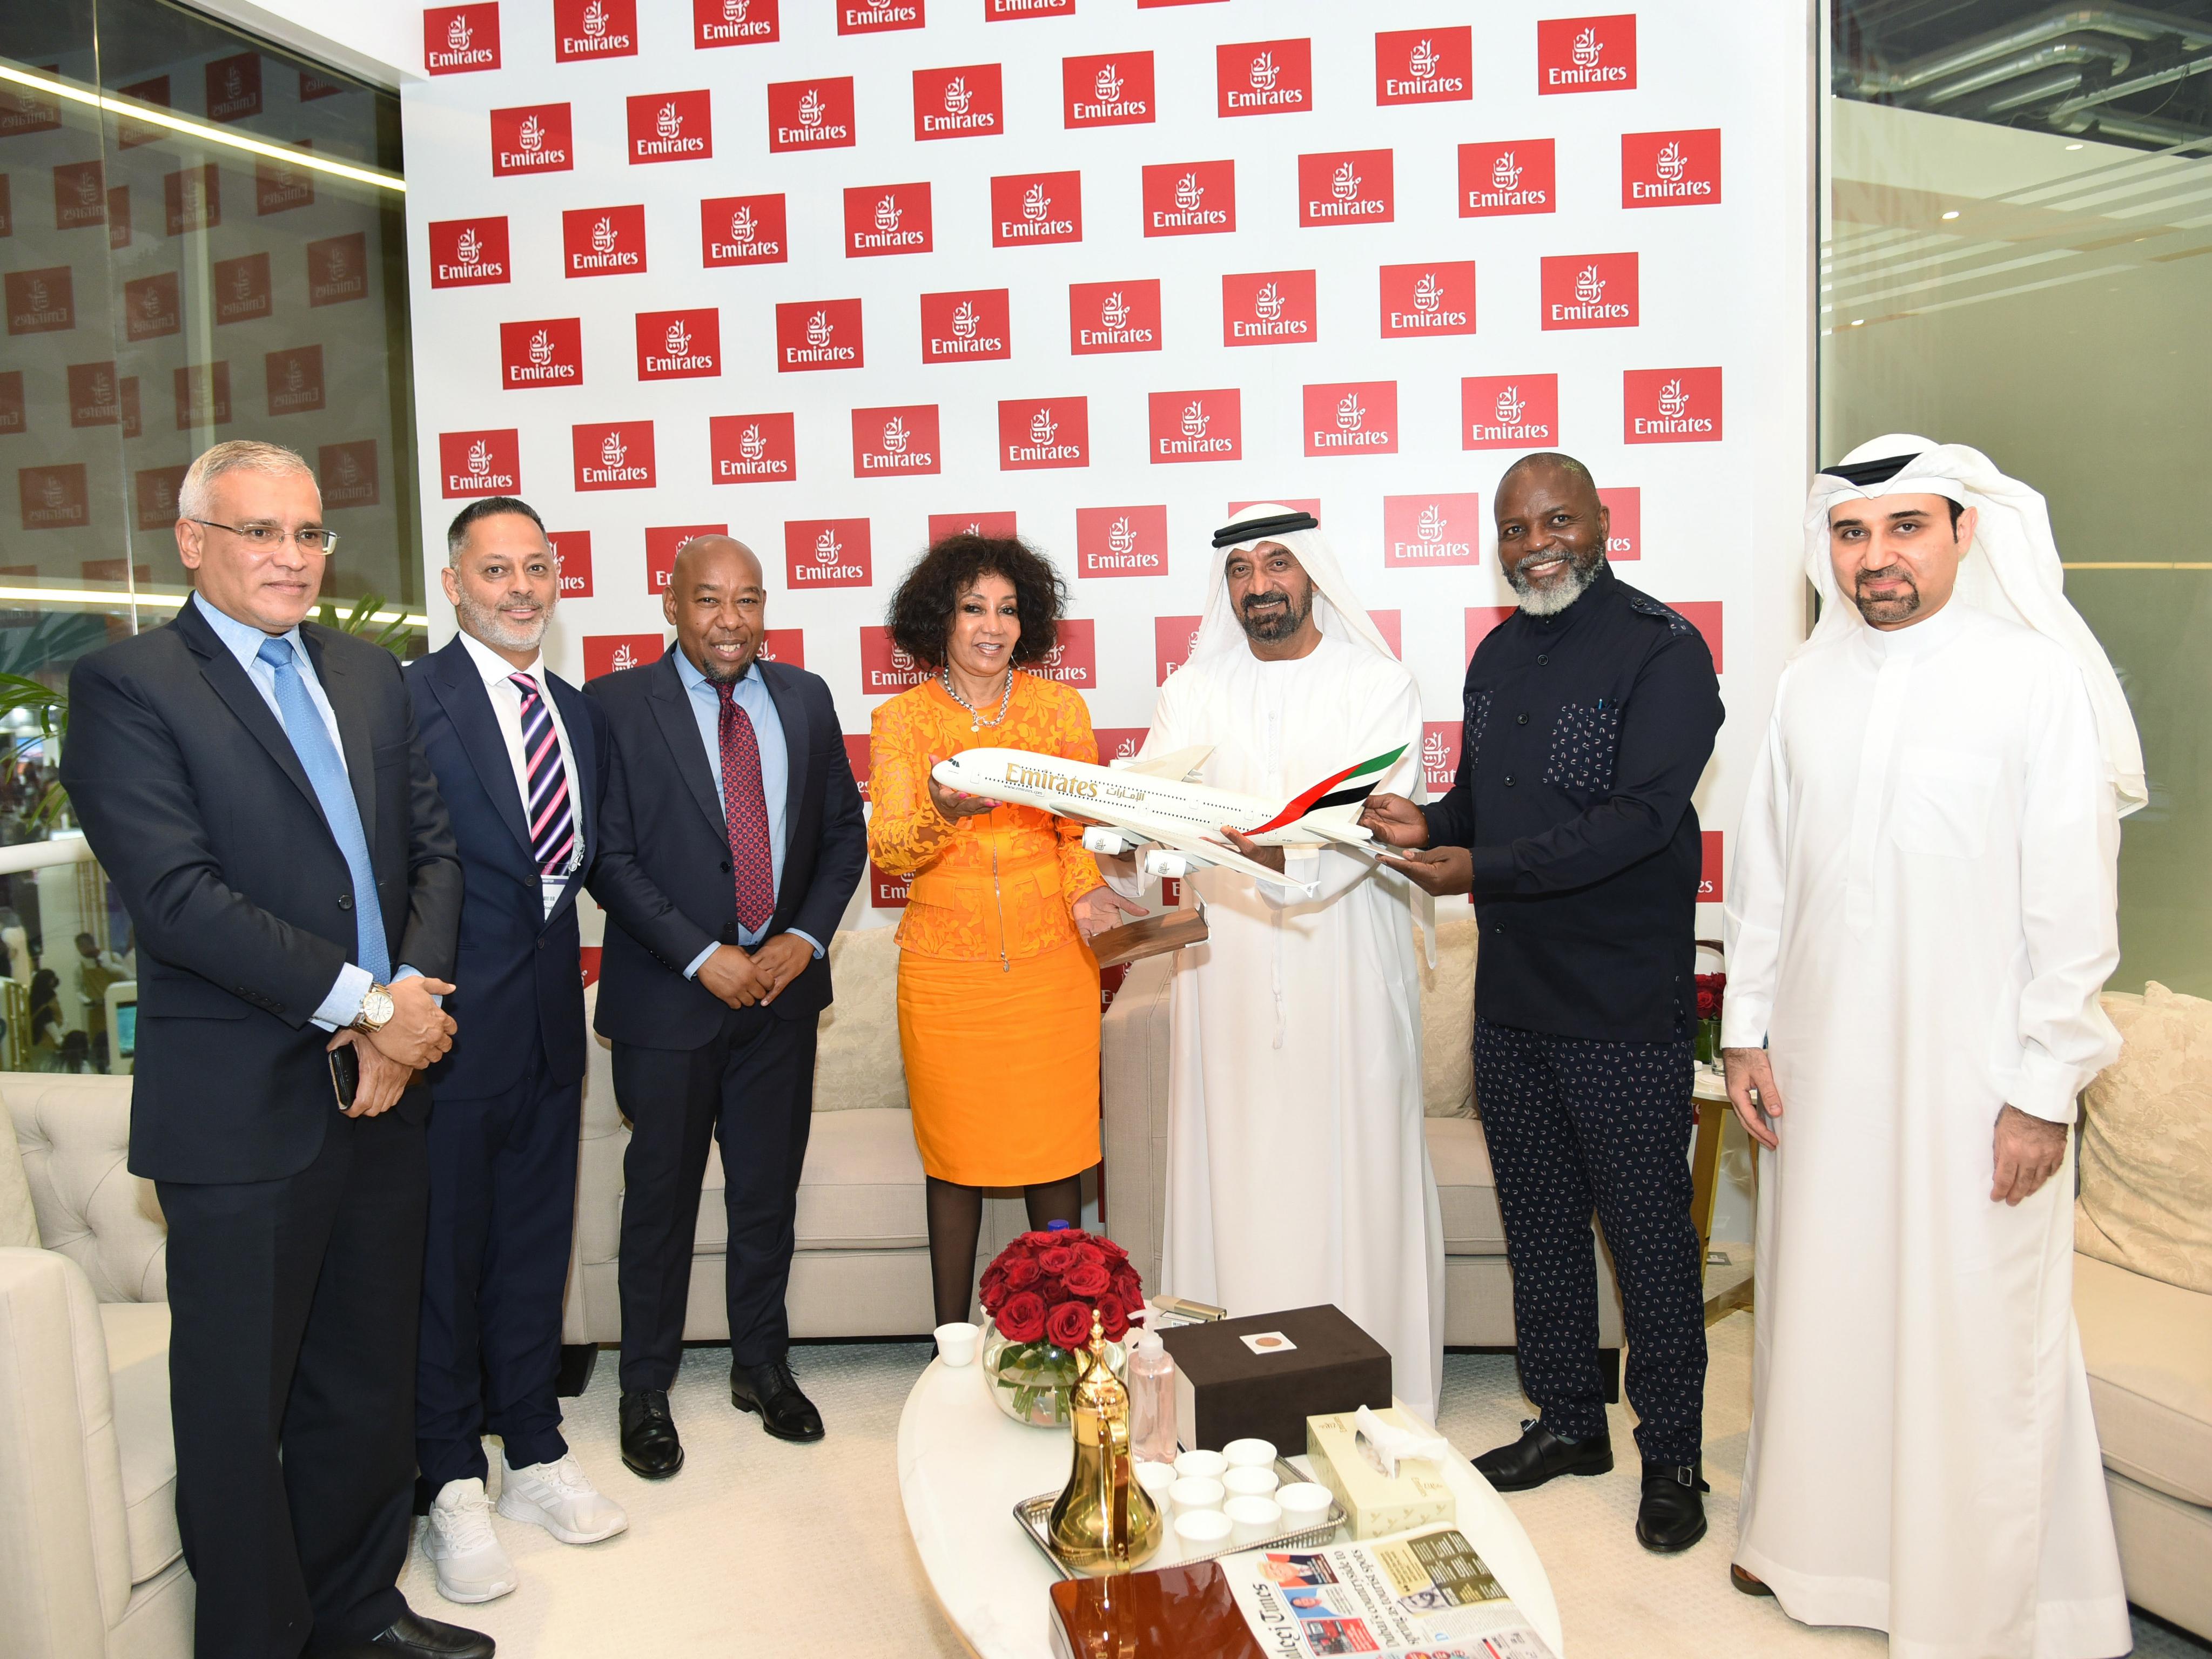 Emirates, signing the Memorandum of Understanding (MoU) to extend the cooperation with South African Tourism Board